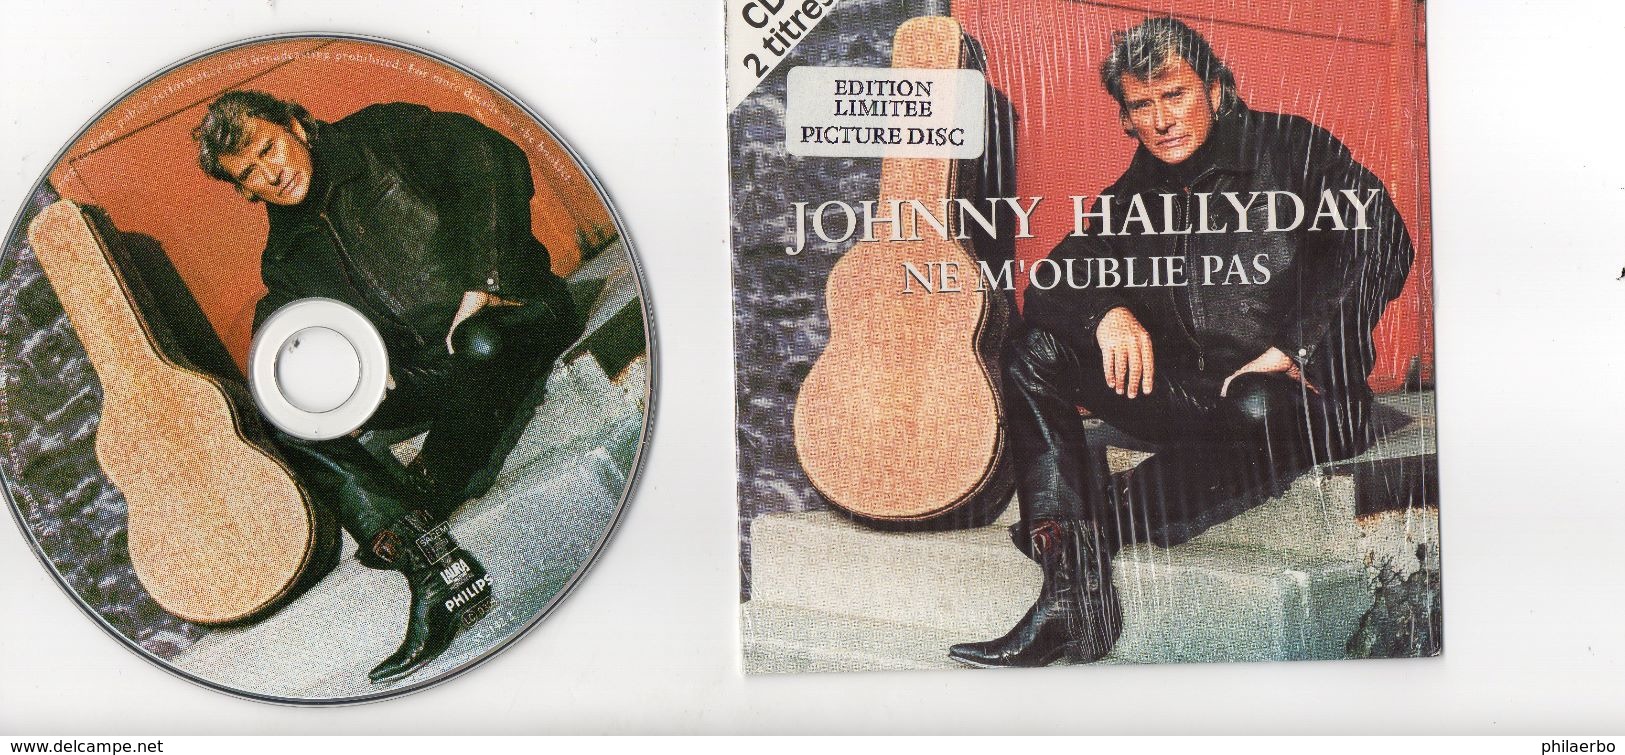 JOHNNY HALLIDAY  1995  " NE M'OUBLIE PAS "   PICTURE DISC  SOUS BLISTER - Limited Editions